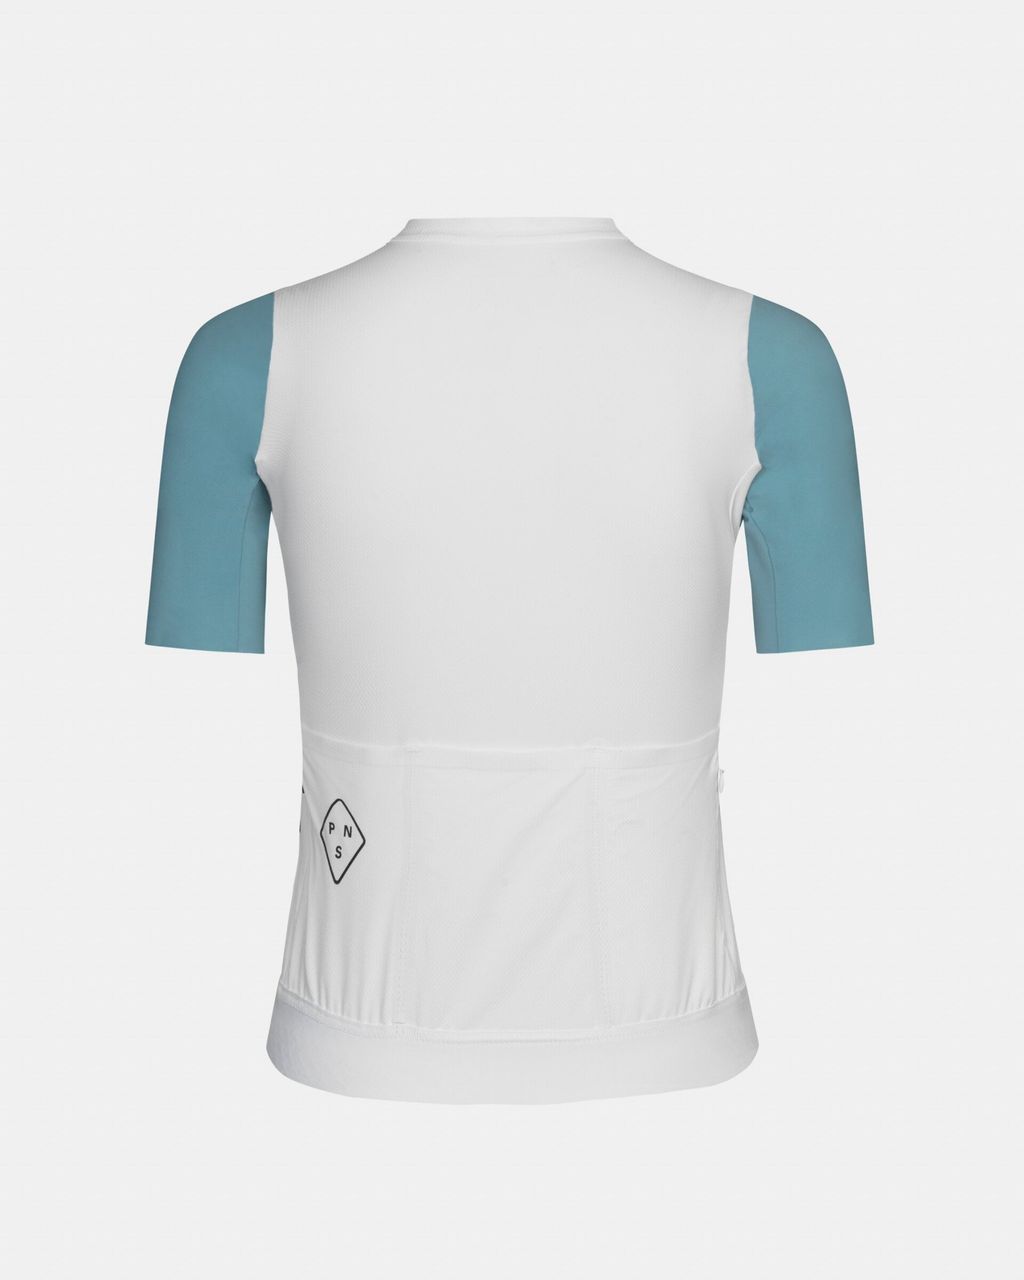 Womens_Solitude-Jersey_White-Blue_Back-pdp-page